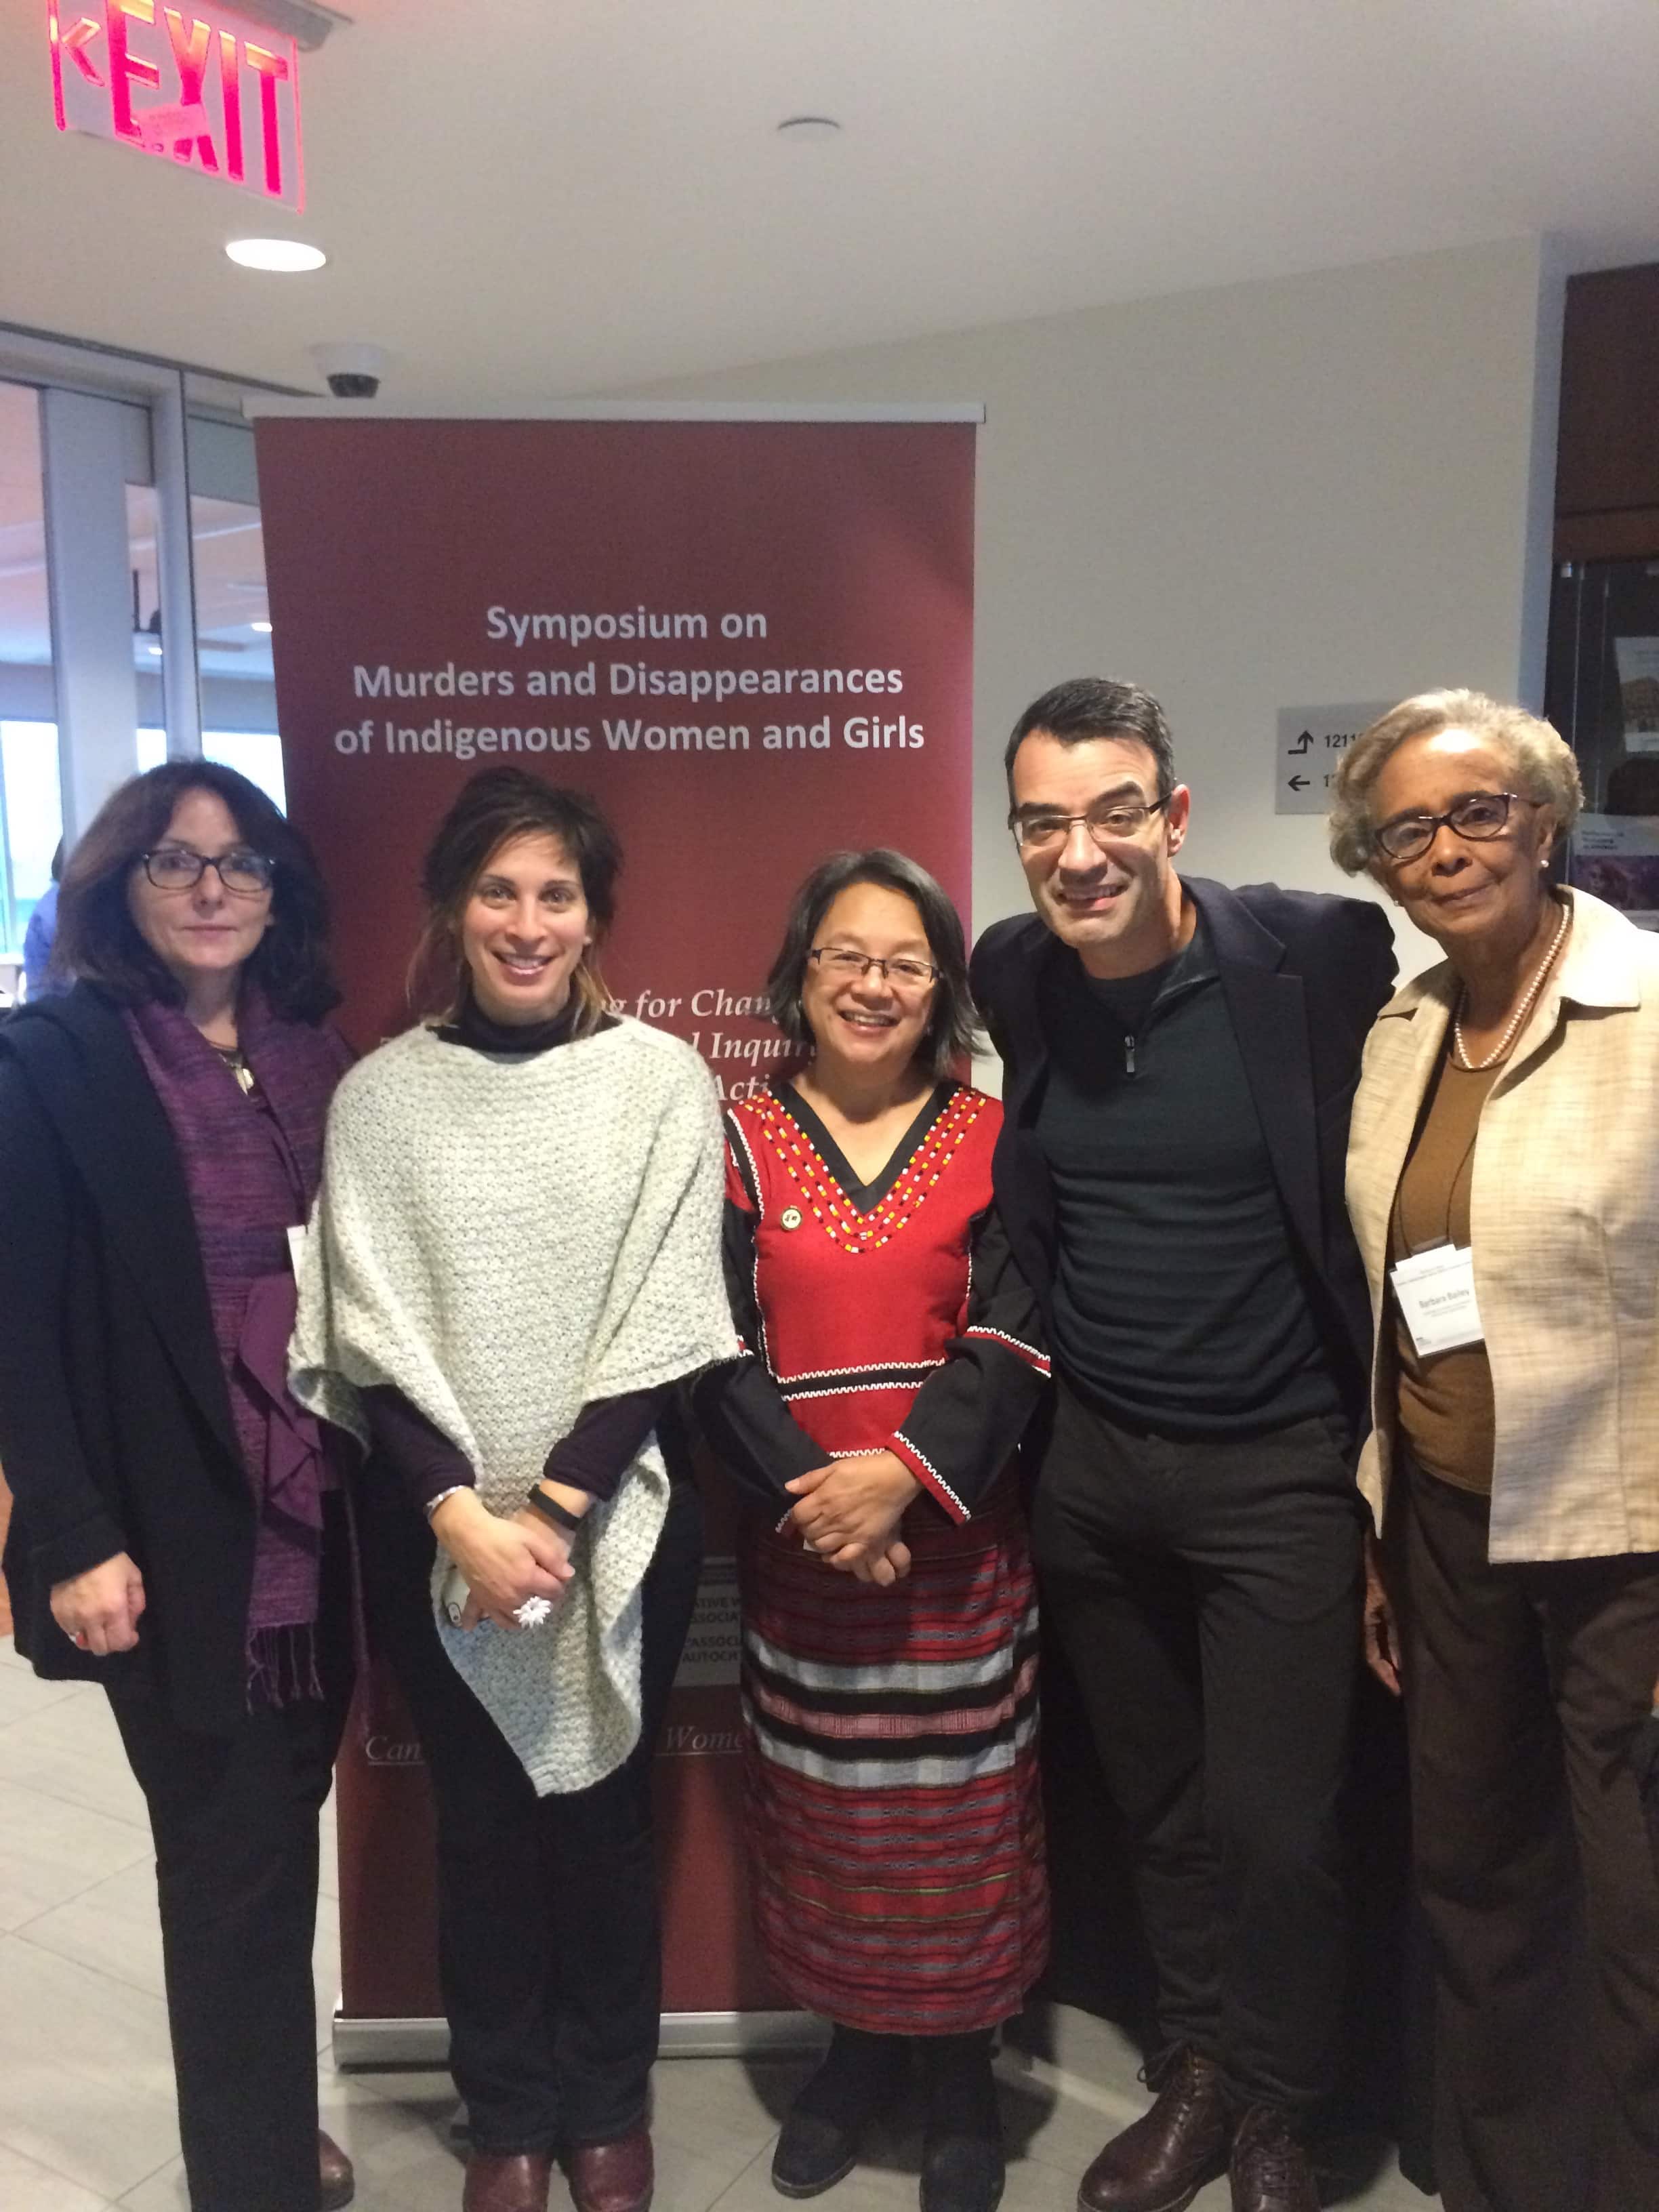 United Nations and Inter-American Commission representatives at the Symposium, "Planning for Change: Towards a National Inquiry and An Effective National Action Plan", Ottawa, January 30-31, 2016. Left to right: UN Special Rapporteur on violence against women, its causes and consequences, Dubravka Šimonović; UN Special Rapporteur on the right to adequate housing, Leilani Farha; UN Special Rapporteur on the rights of Indigenous peoples, Victoria Tauli-Corpuz; Chair of the Inter-American Commission on Human Rights and Rapporteur for Canada, James Cavallaro; and Vice-Chair of the UN Committee on the Elimination of Discrimination against Women (CEDAW), Barbara Bailey (absent: Member of the CEDAW Committee and Chair of the Working Group on Follow-up to Inquiries, Ruth Halperin-Kaddari). (Photo Credit: Lara Koerner Yeo)